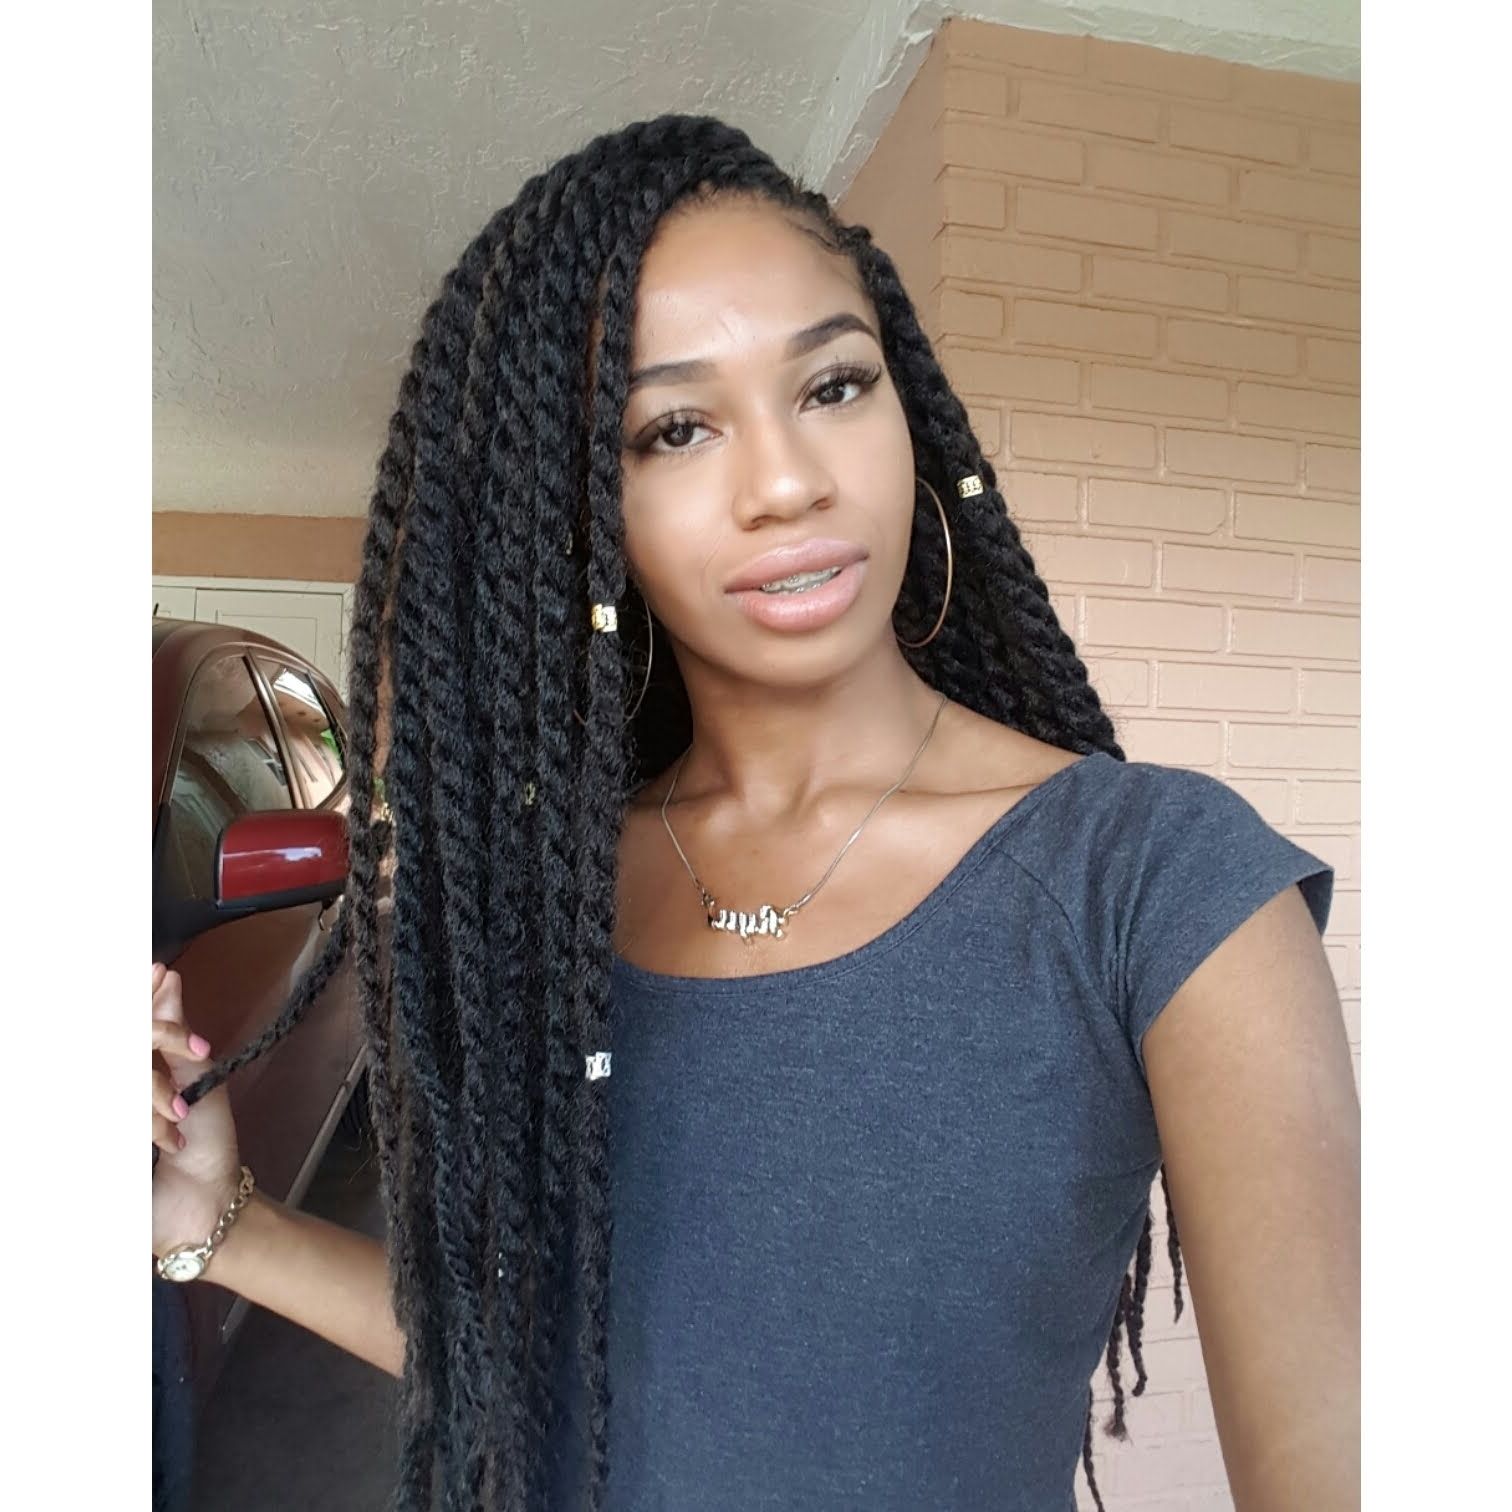 Twist Braid Hairstyles Youtube Pictures For School Kinky Braids Regarding Well Known Twist Braided Hairstyles (View 12 of 15)